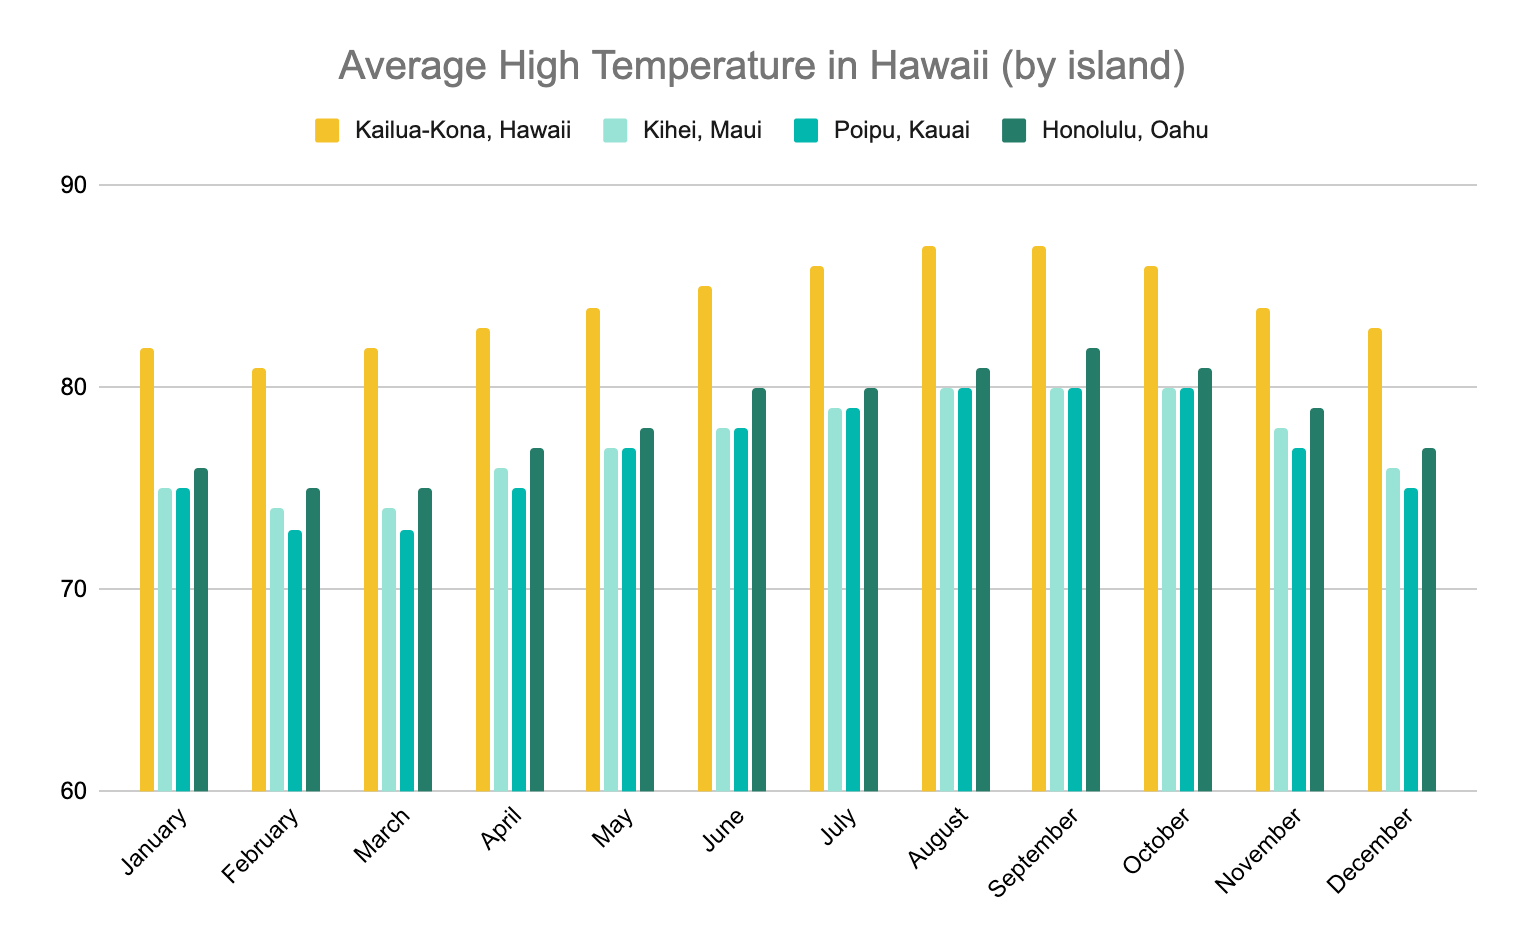 Graph showing the average high temperatures (Fahrenheit) in Hawaii throughout the year by island. The Big Island has consistently higher temperatures and temperatures across the other three islands tend to be pretty similar to one another.